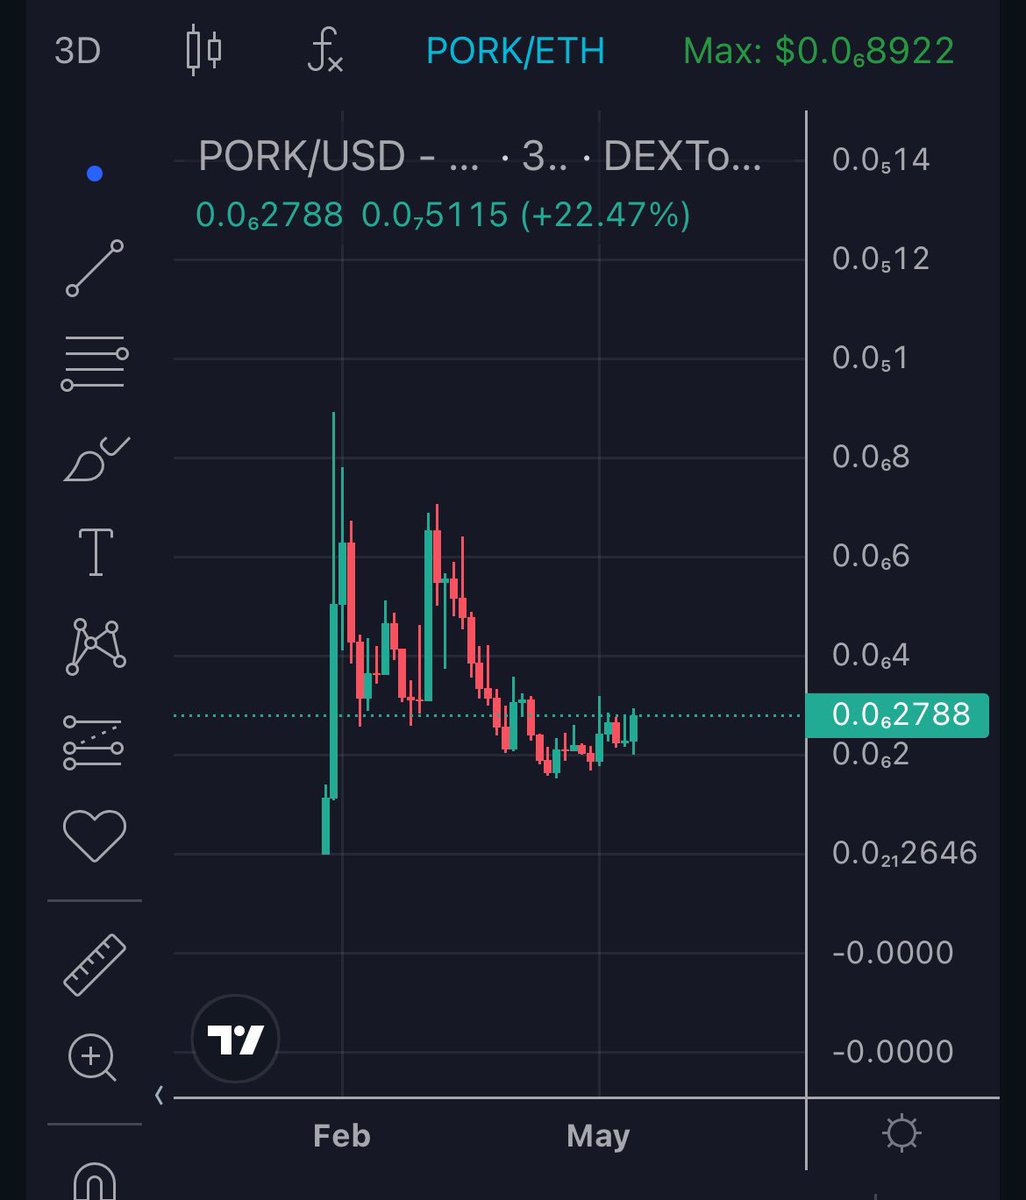 $PORK is still young but the chart looks strong. Hovering above 100M mc I personally think it is the safest #memecoin bet considering the strong liquidity and historical data.

This one could just break out any moment considering they are not yet listed on a big exchange and have